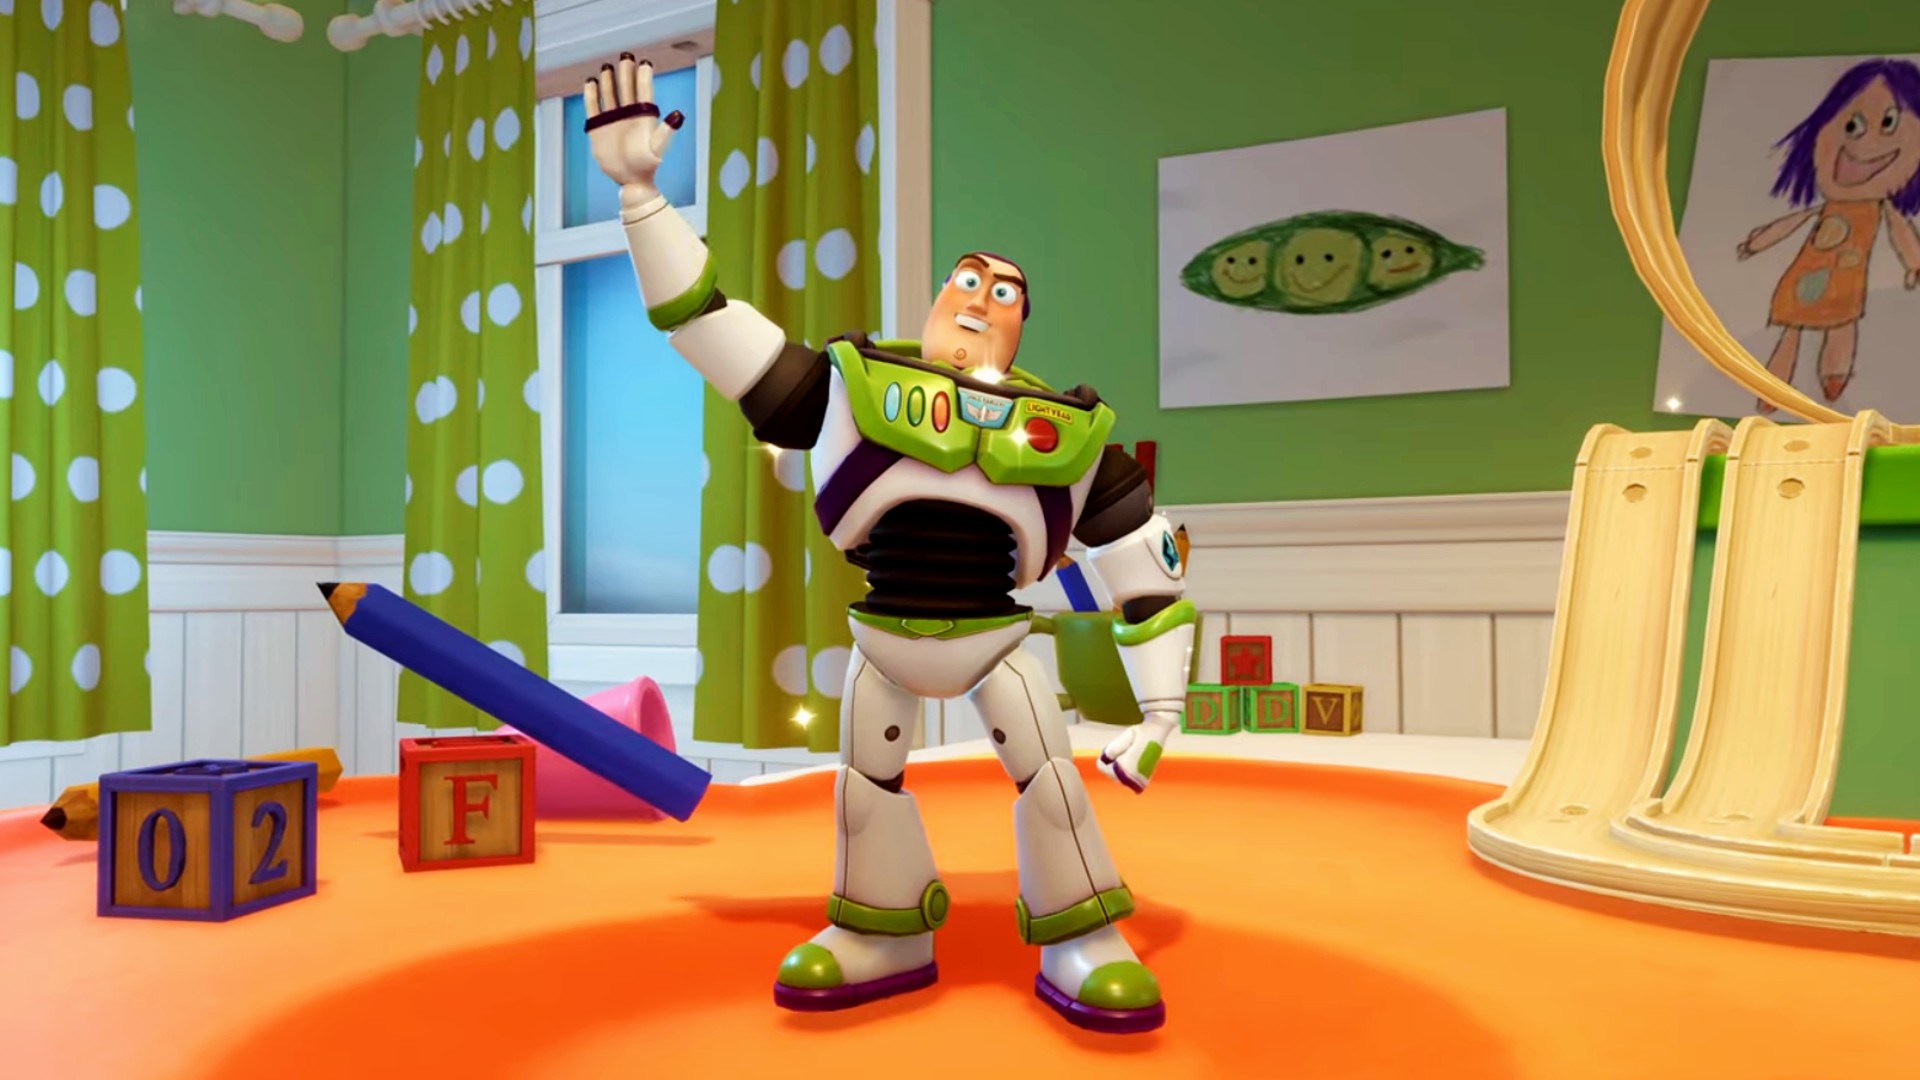 Disney Dreamlight Valley Toy Story update release date speculation